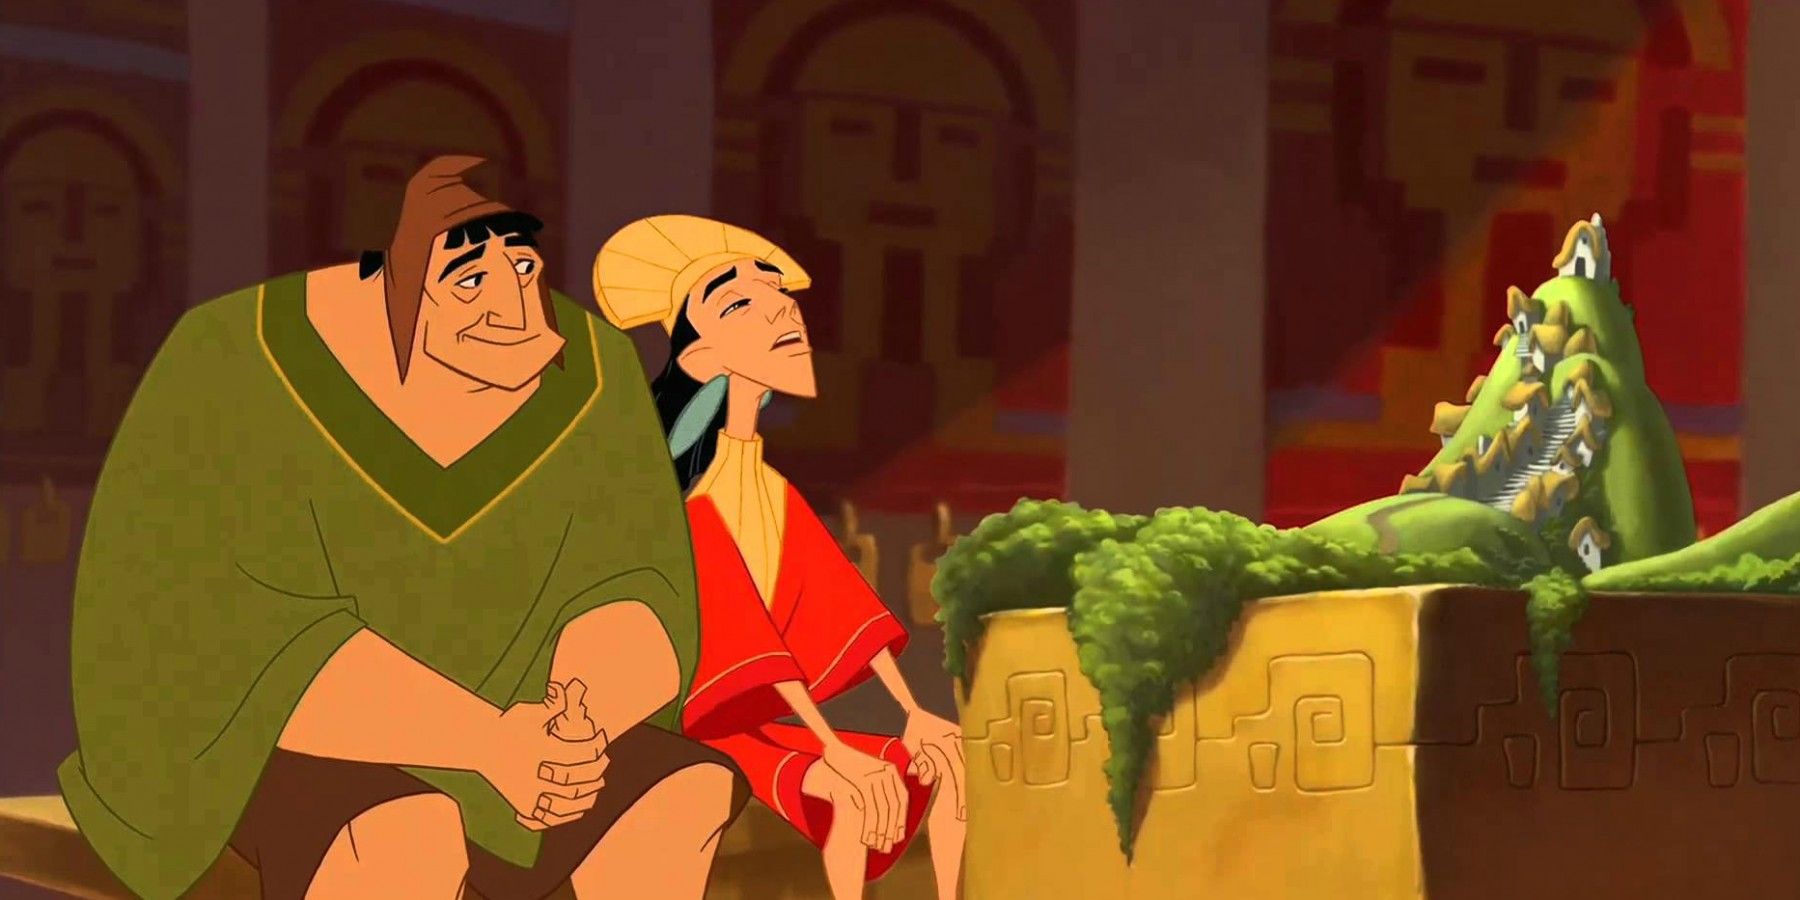 A Different Ending in Emperor's New Groove